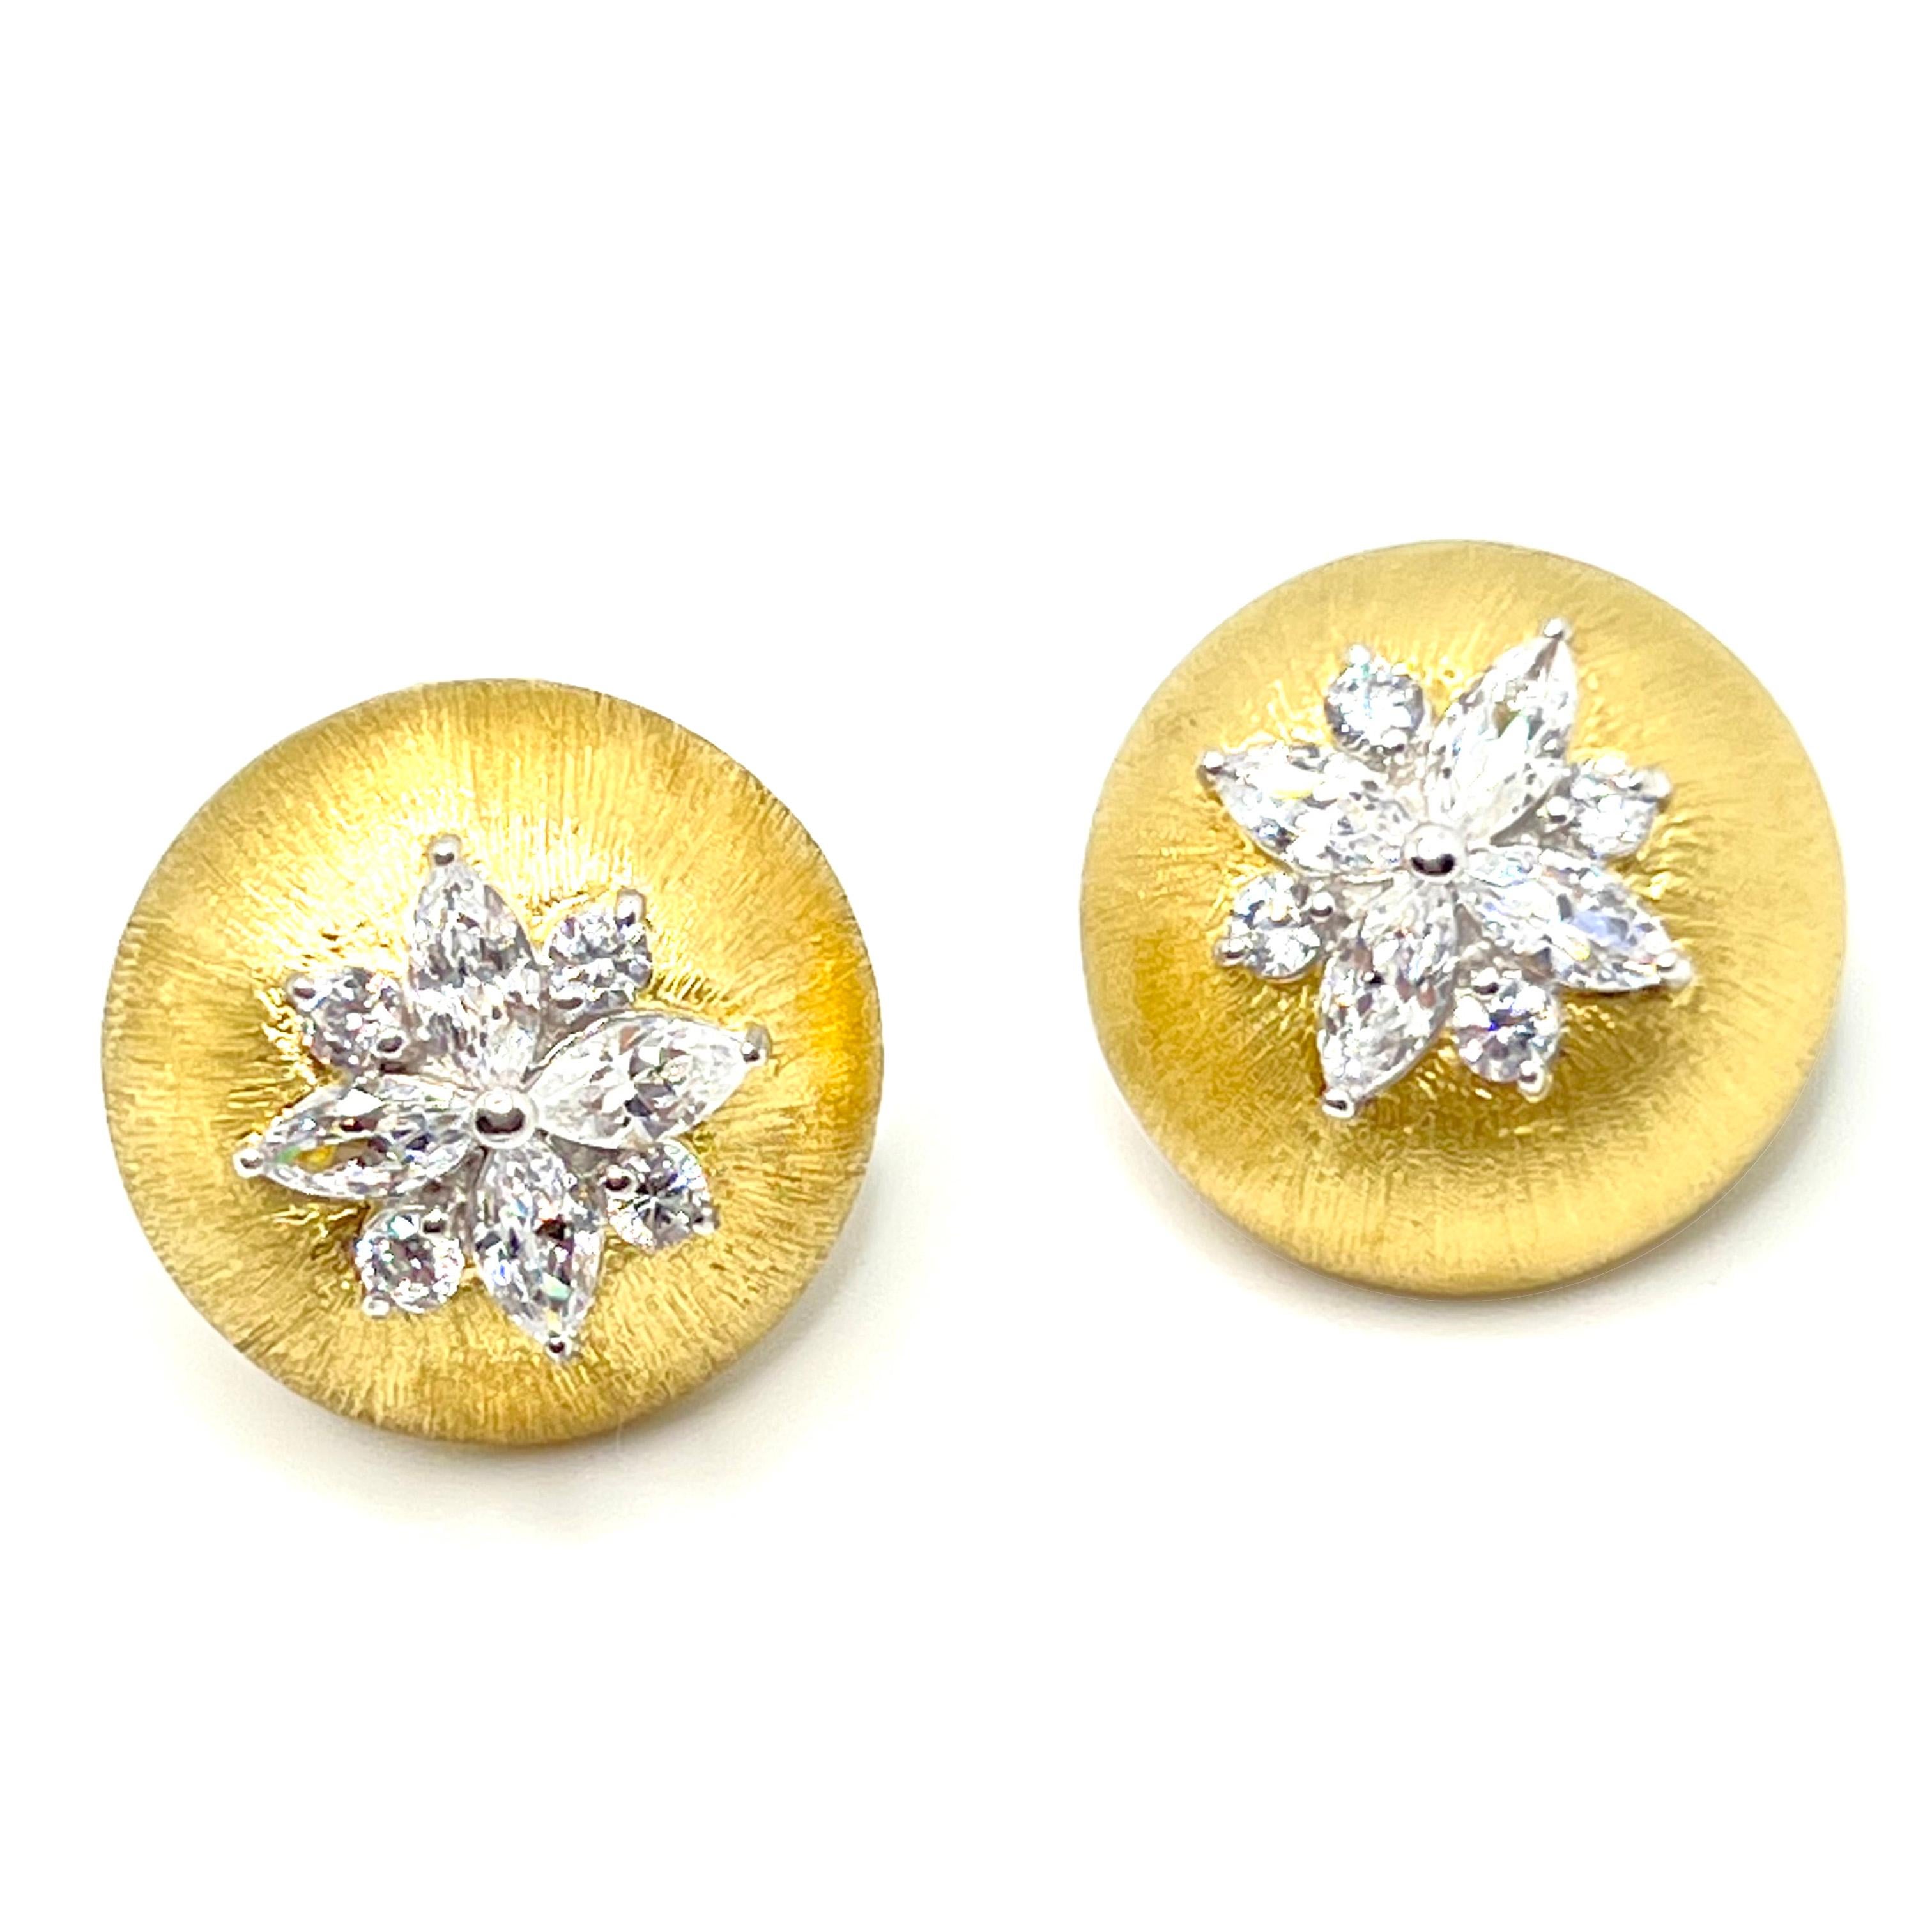 Bijoux Num's Flower Simulated Diamond Vermeil Round Button Clip-on Earrings

The earrings features top quality marquis and round simulated diamonds, handset in 18k gold vermeil sterling silver, hand-engraved streaking technique.  Very comfortable